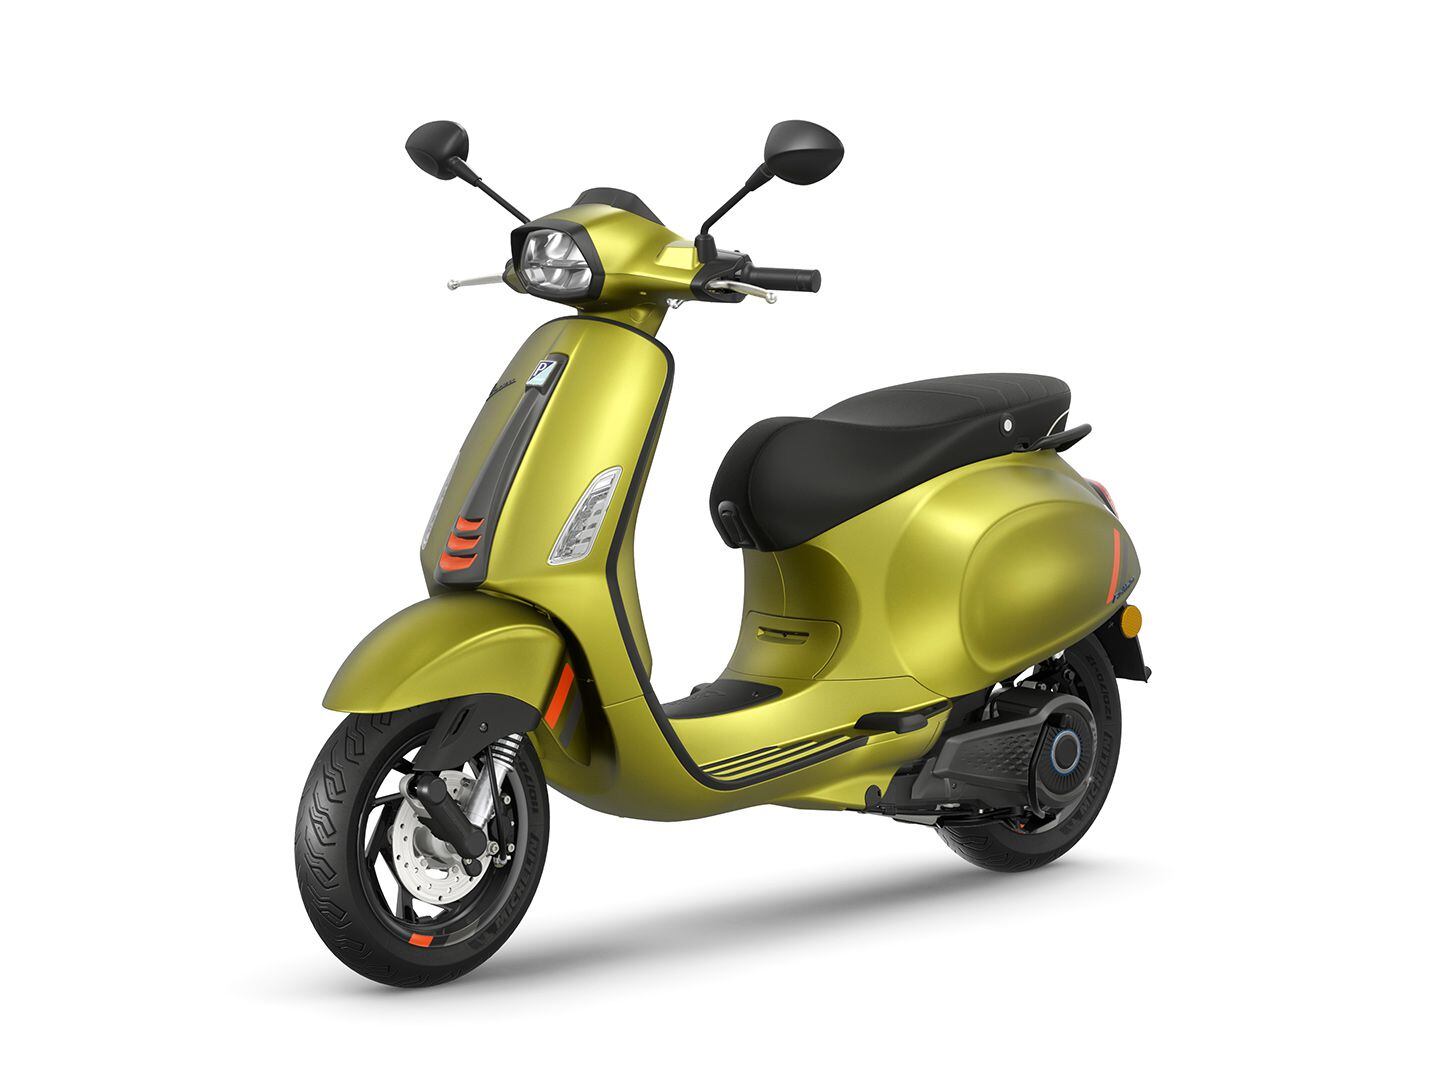 Two electric power options are available for both the Sprint (shown) and Primavera models.